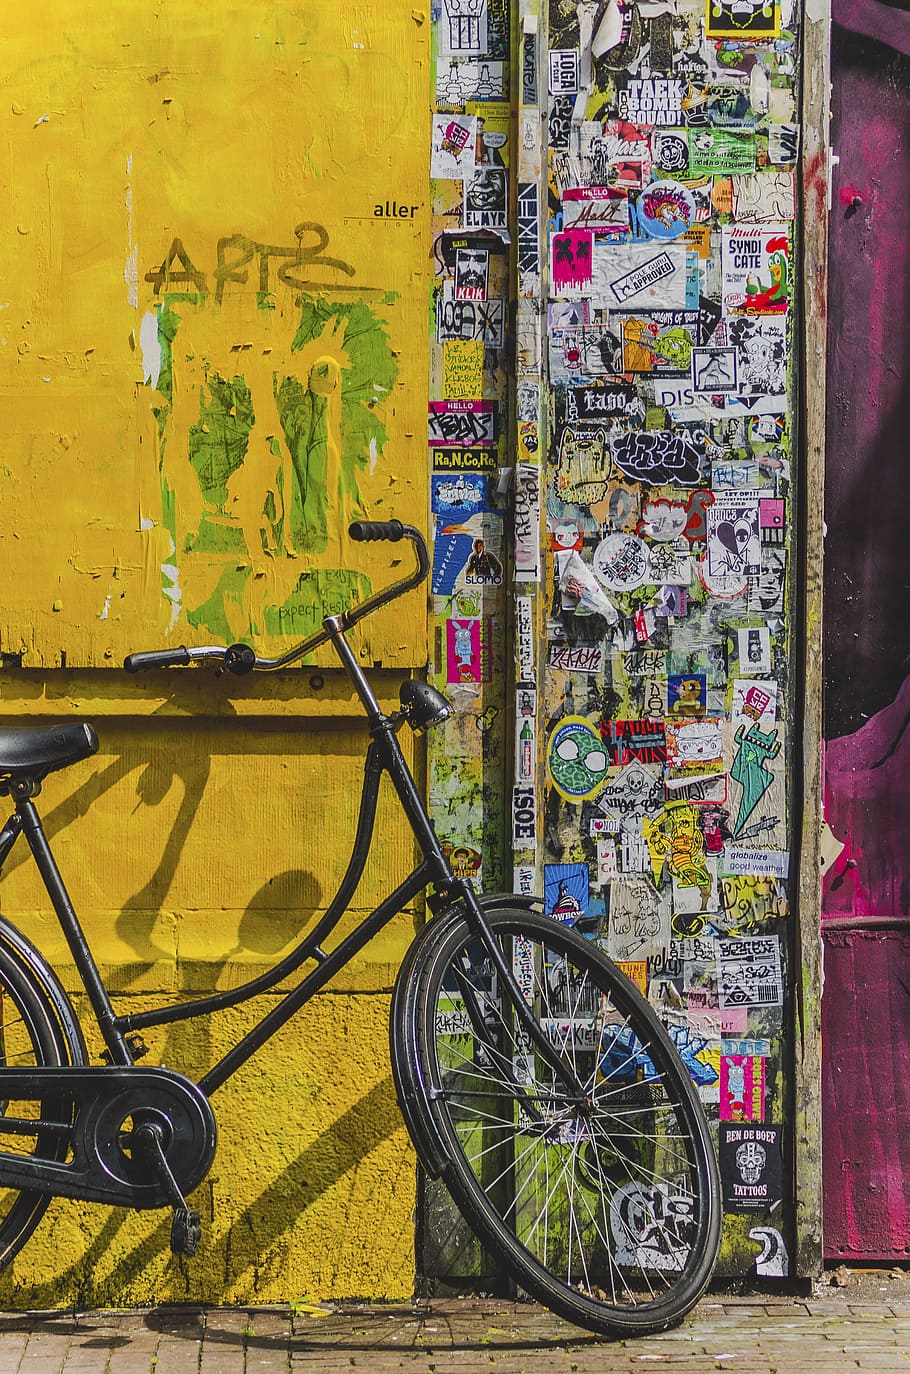 A bicycle is parked against the wall - Graffiti, street art